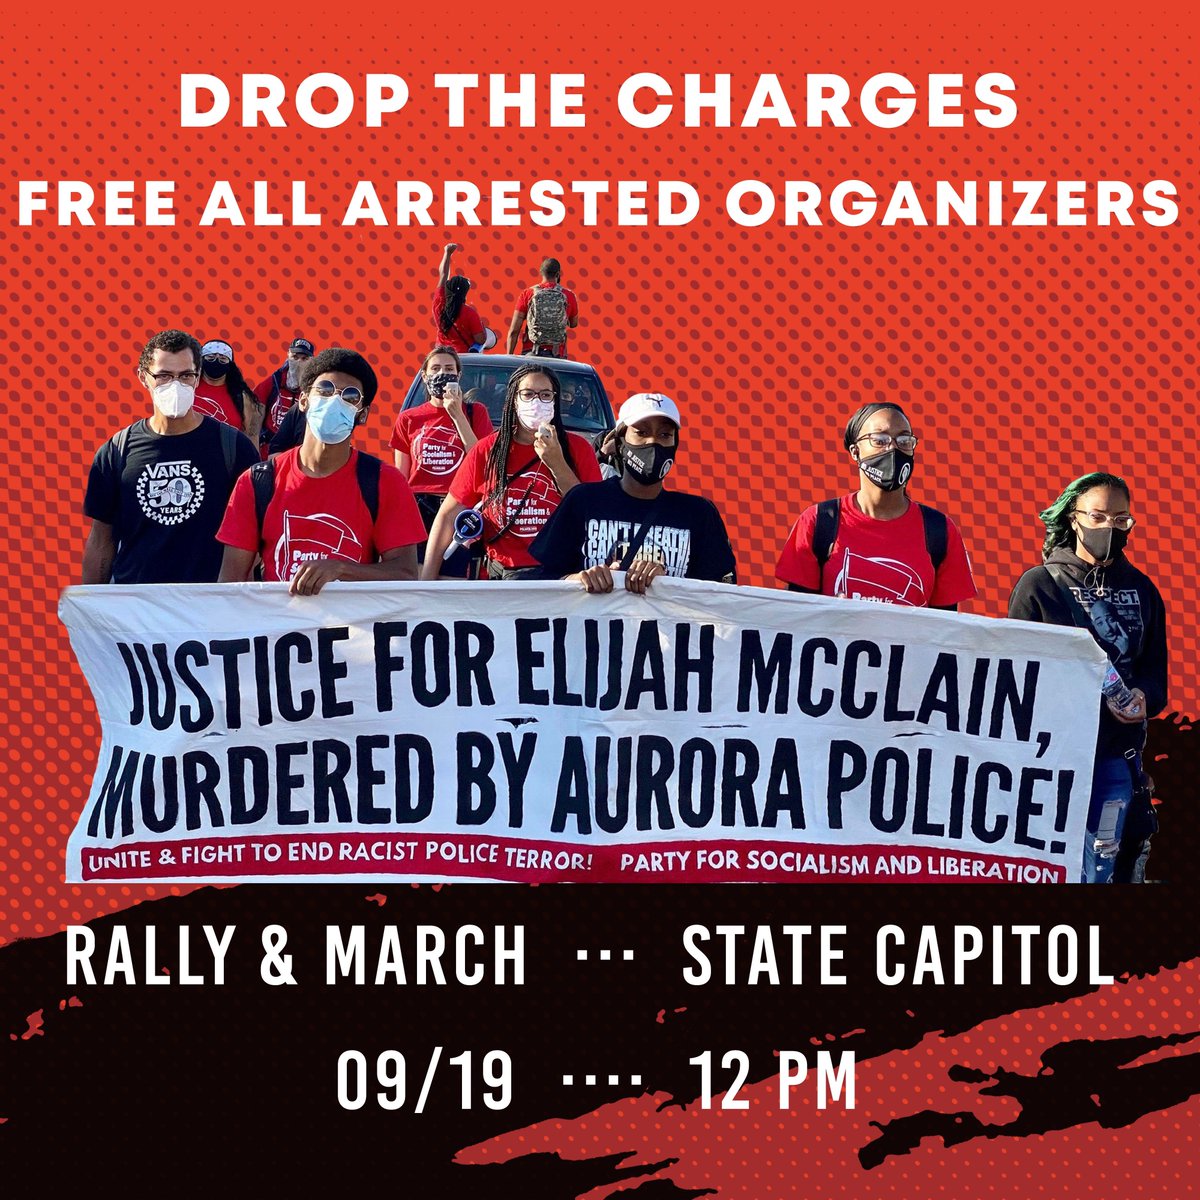 If you're in the Denver/Aurora area, COME OUT TODAY!If you're not - you can still help!Sign the petition   http://pslweb.org/dropthecharges Donate to the legal fund   http://pslweb.org/donate4denver And share the event info on social media using the hashtag  #DropTheChargesCO